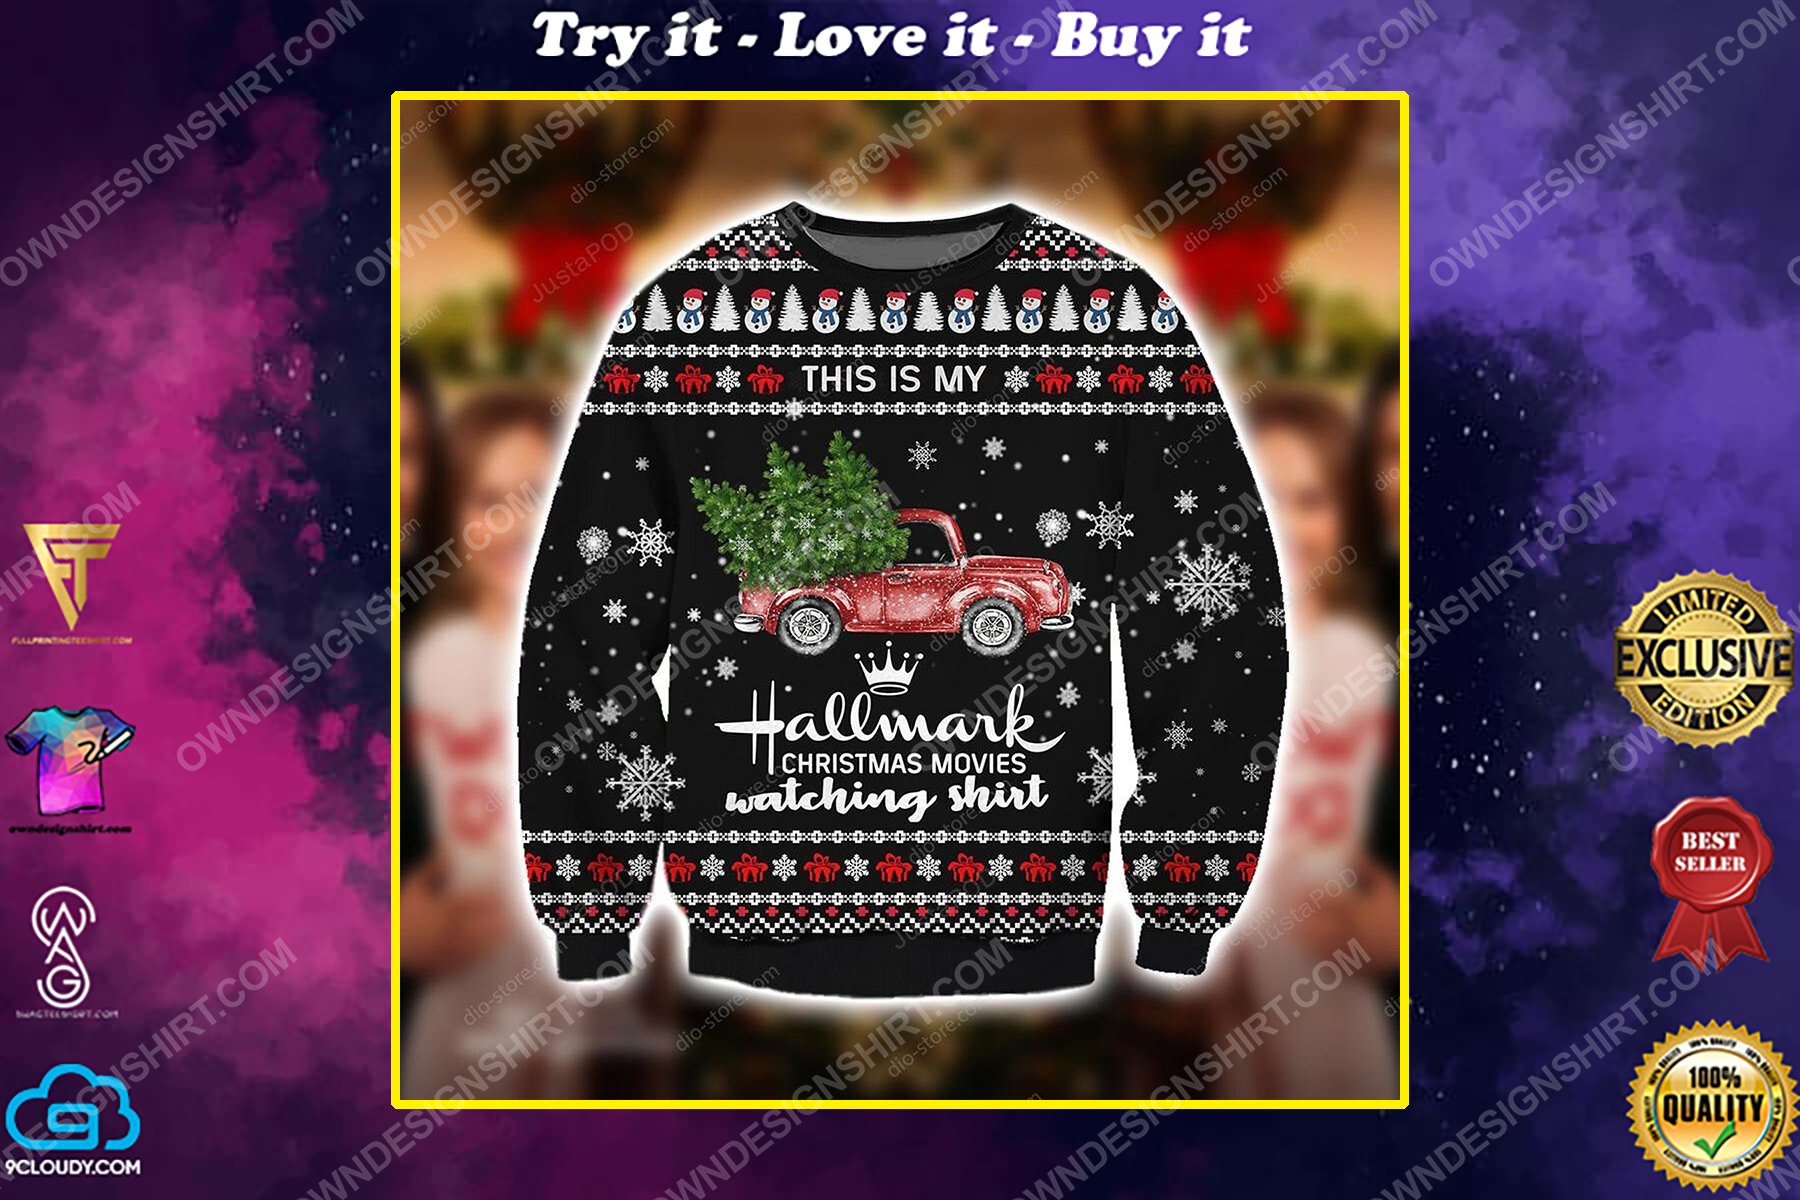 Red truck this is my hallmark christmas movie watching shirt ugly christmas sweater